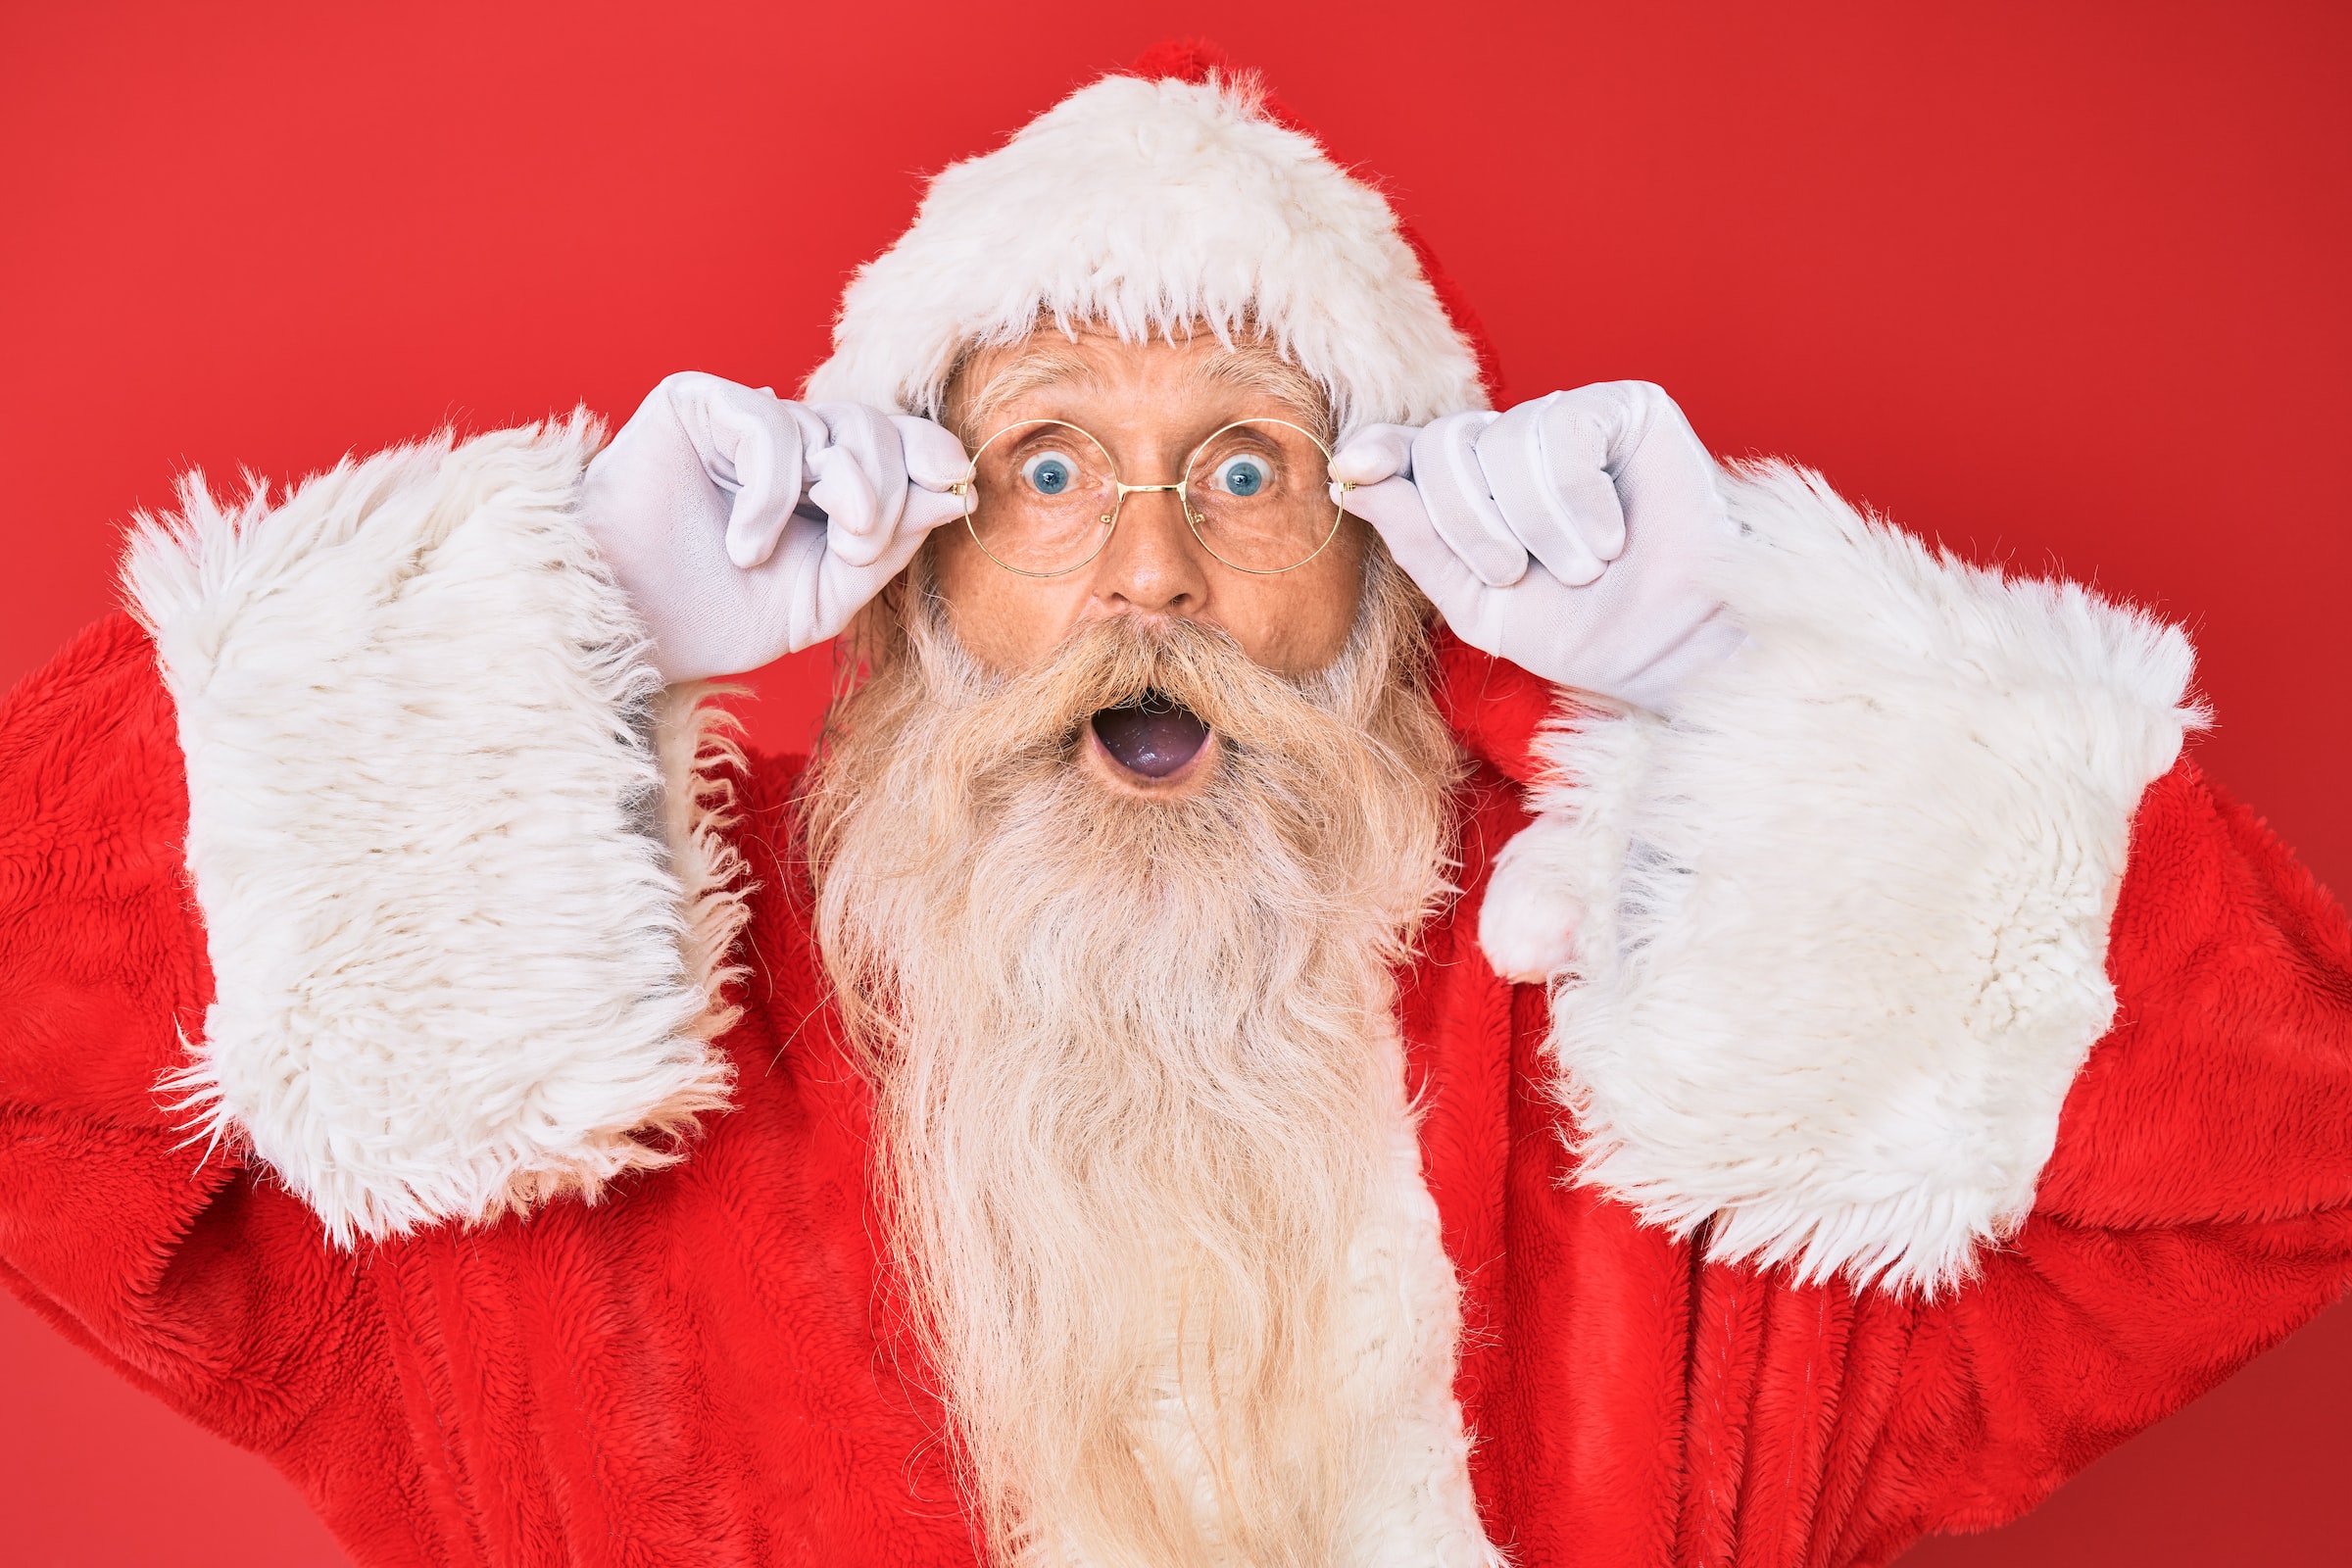 A 10-year-old Girl Asked The Police To Test Sent DNA Sample To Determine If Santa Claus Is Real